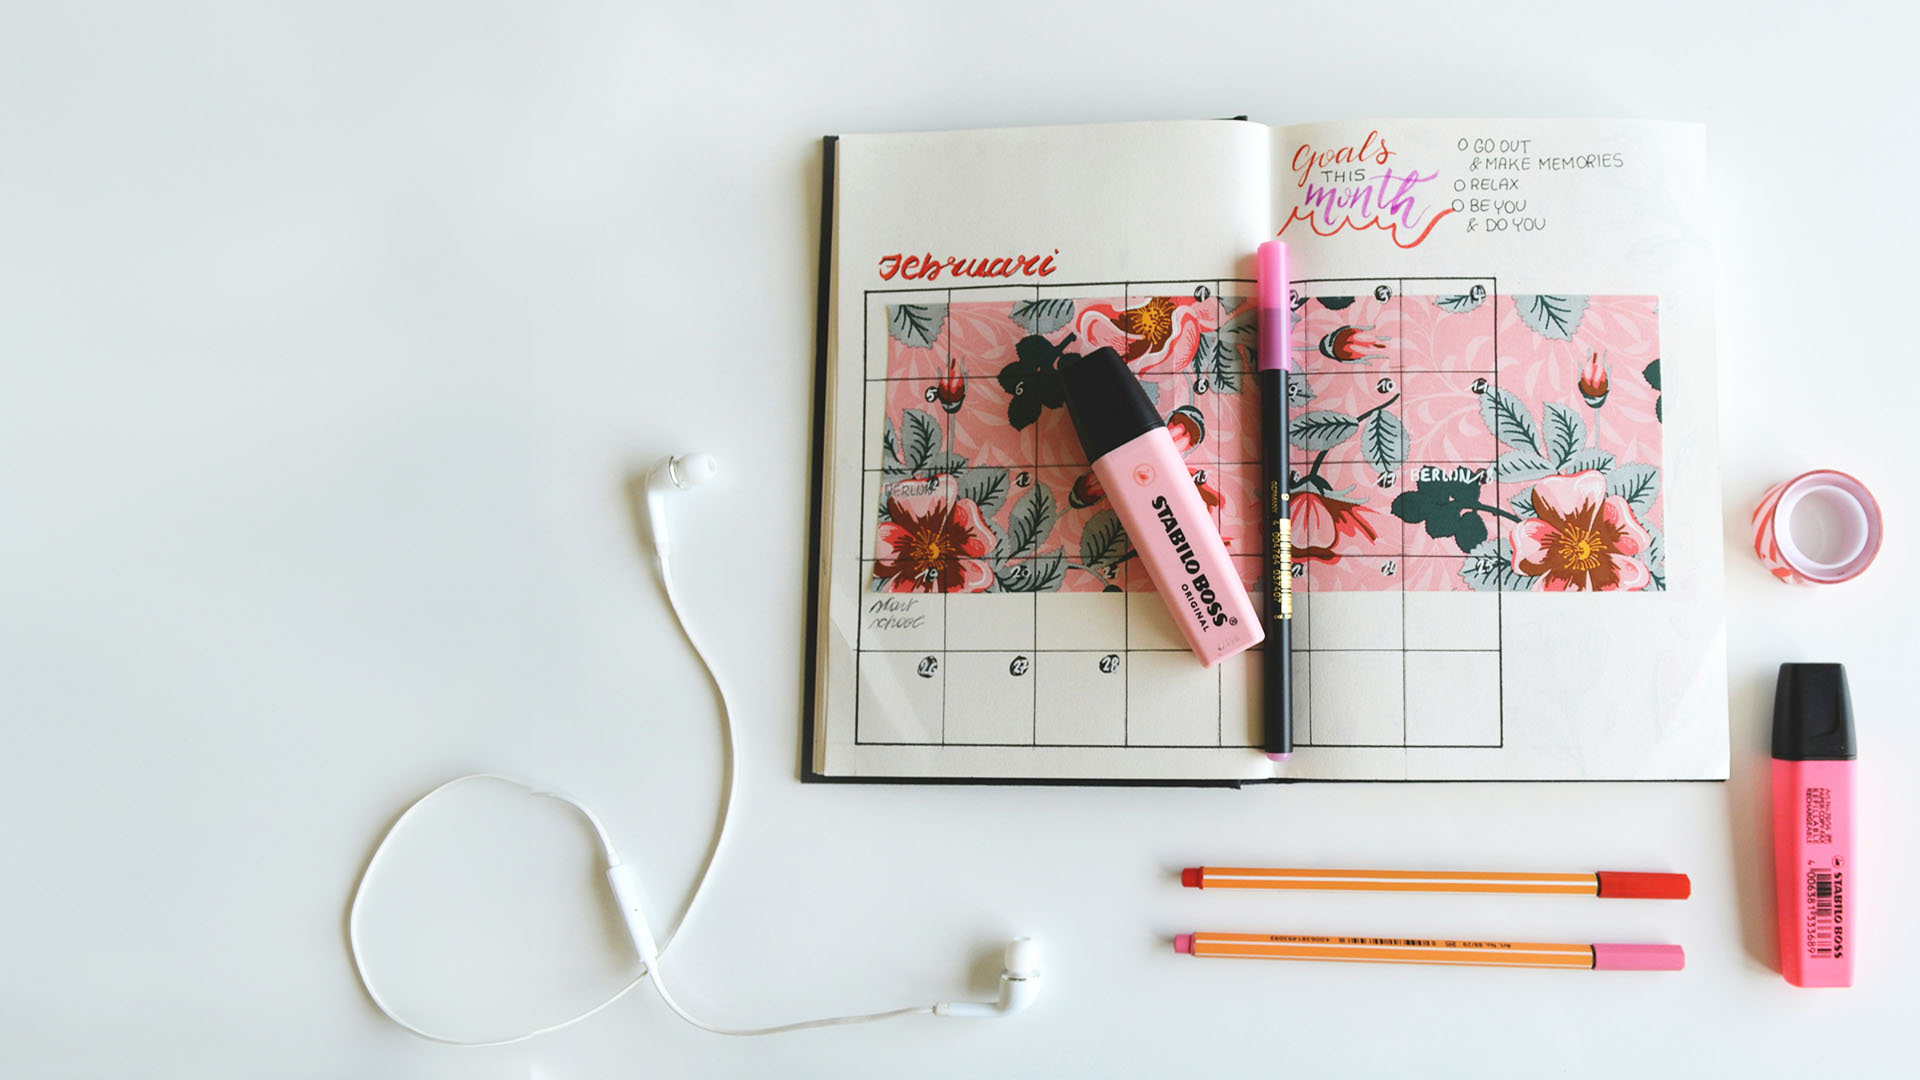 How to Make Custom Planner Stamps for Bullet Journals & Planners